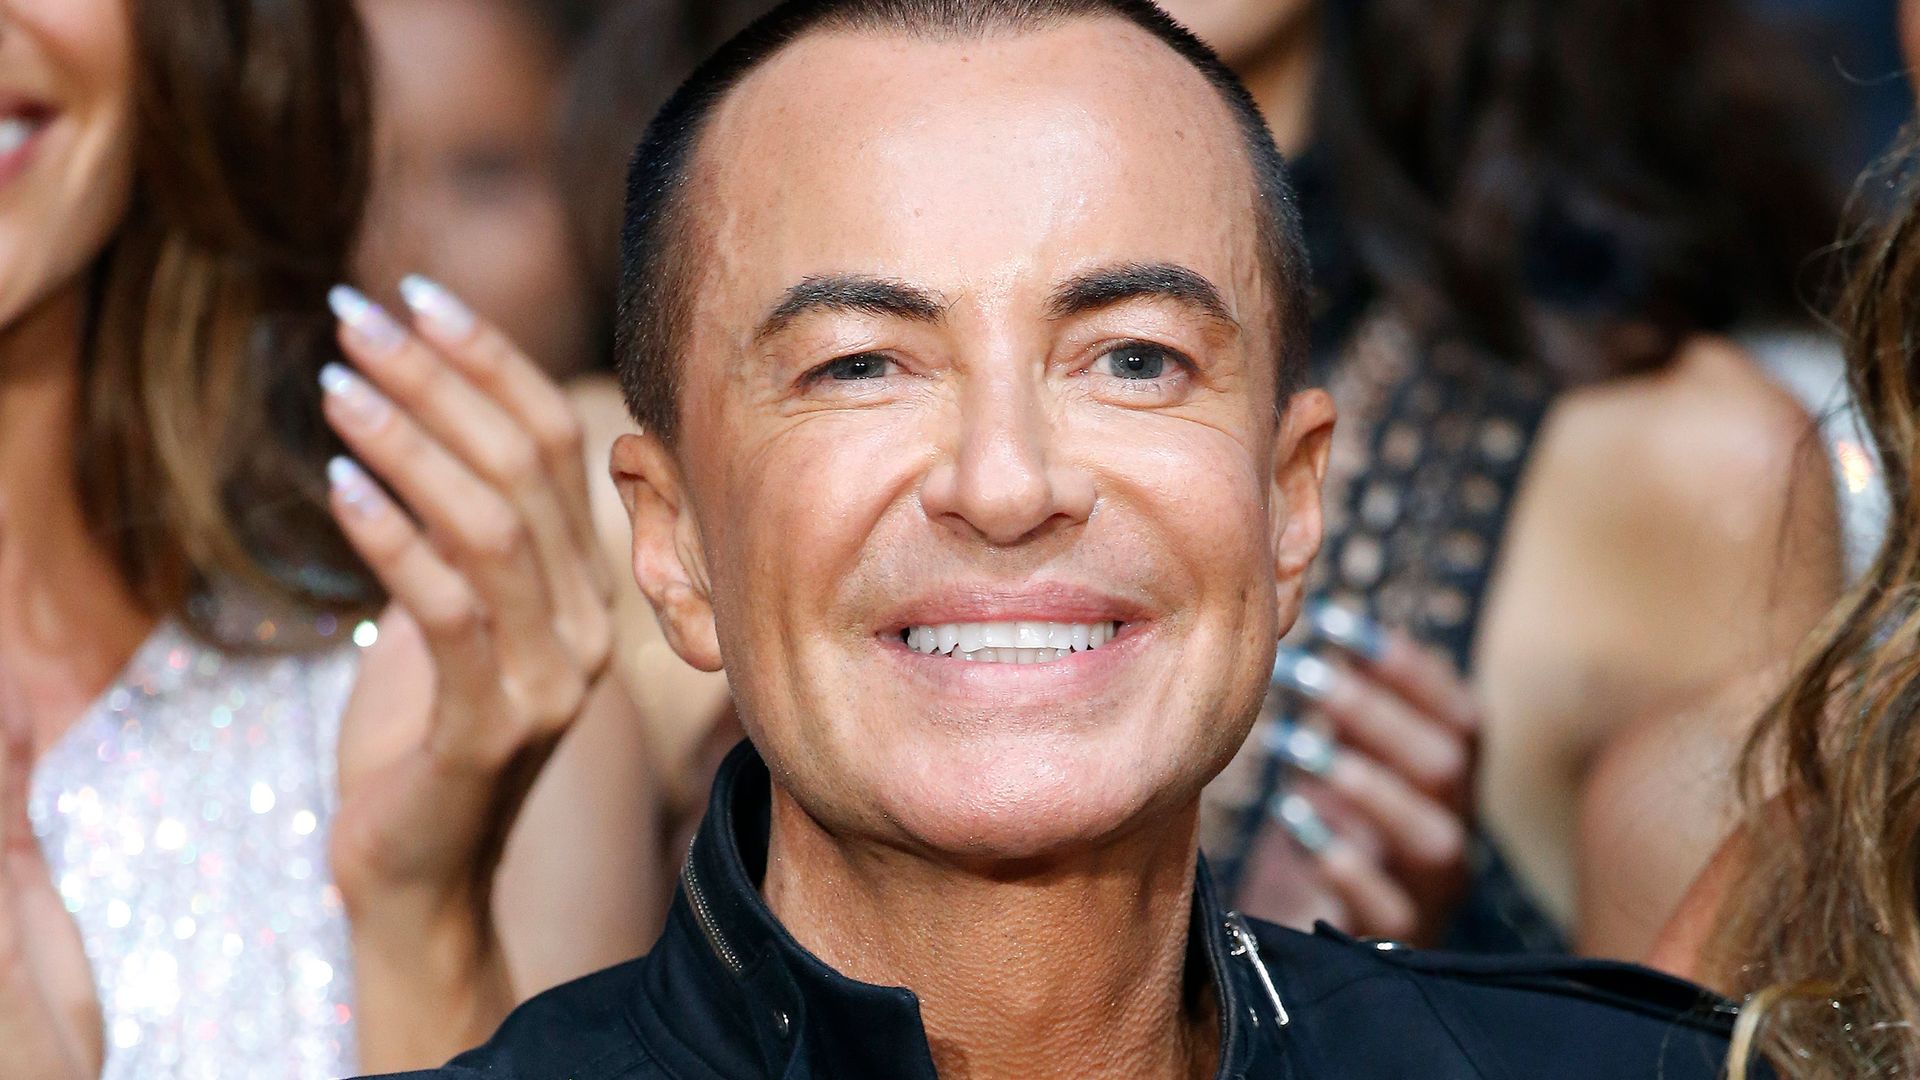 Julien Macdonald smiling as people applaud his fashion show around him